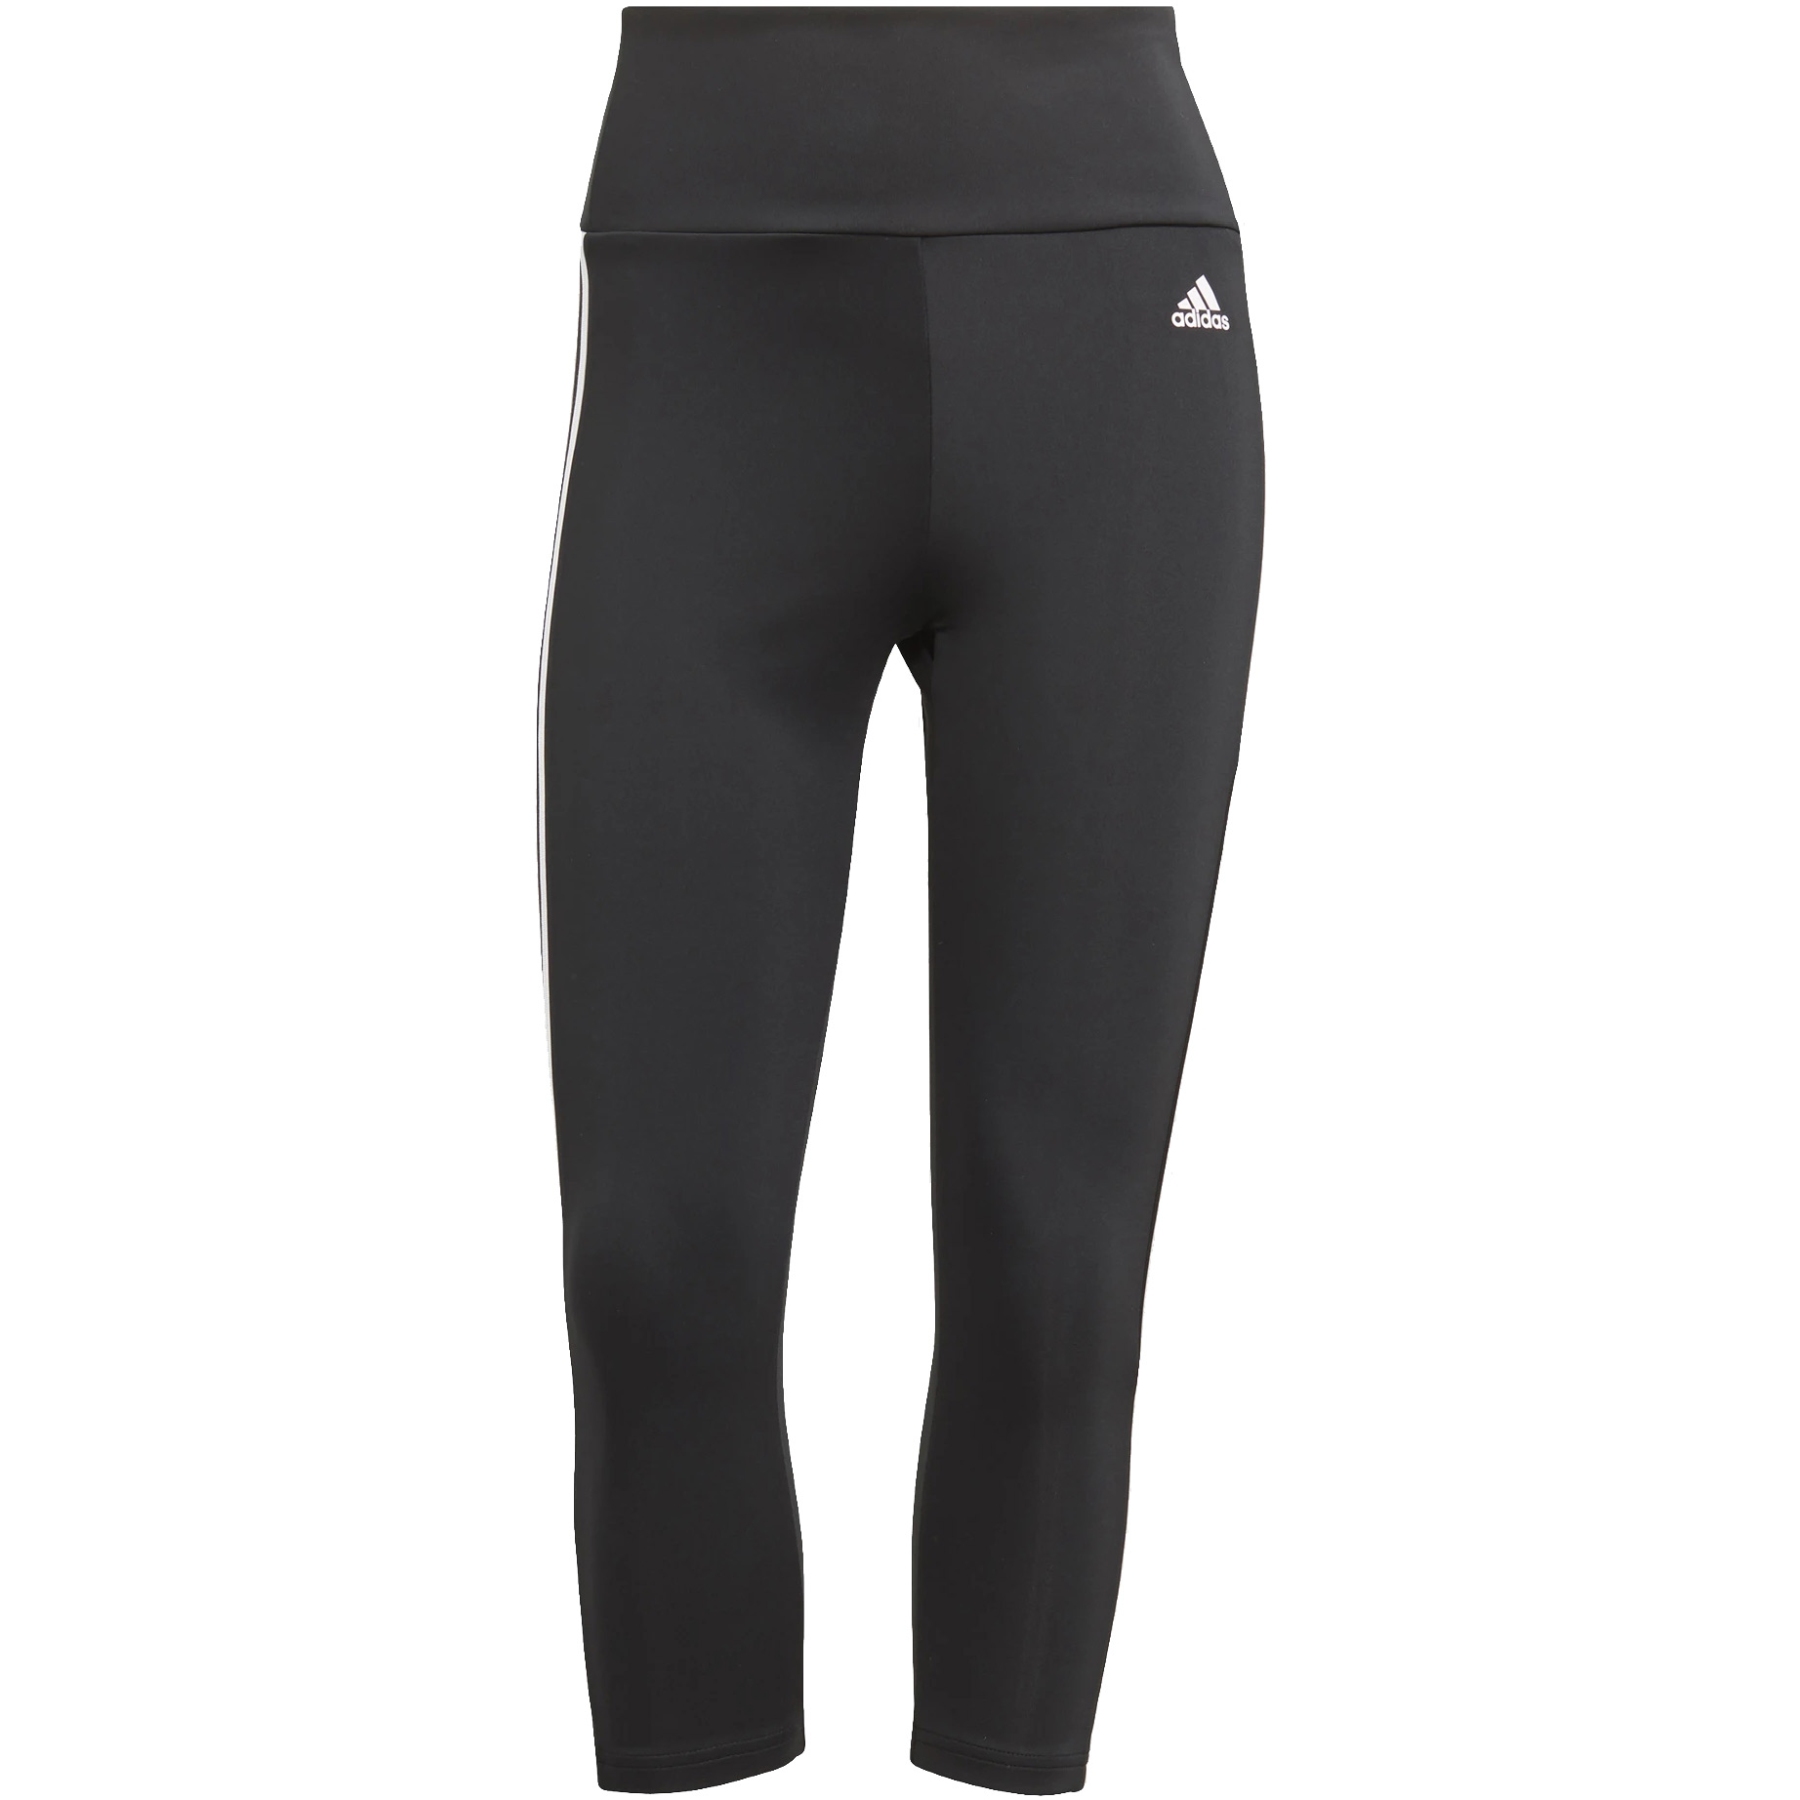 Image of adidas Women's Designed To Move High-Rise 3-Stripes 3/4 Sport Tights - black/white GL3985